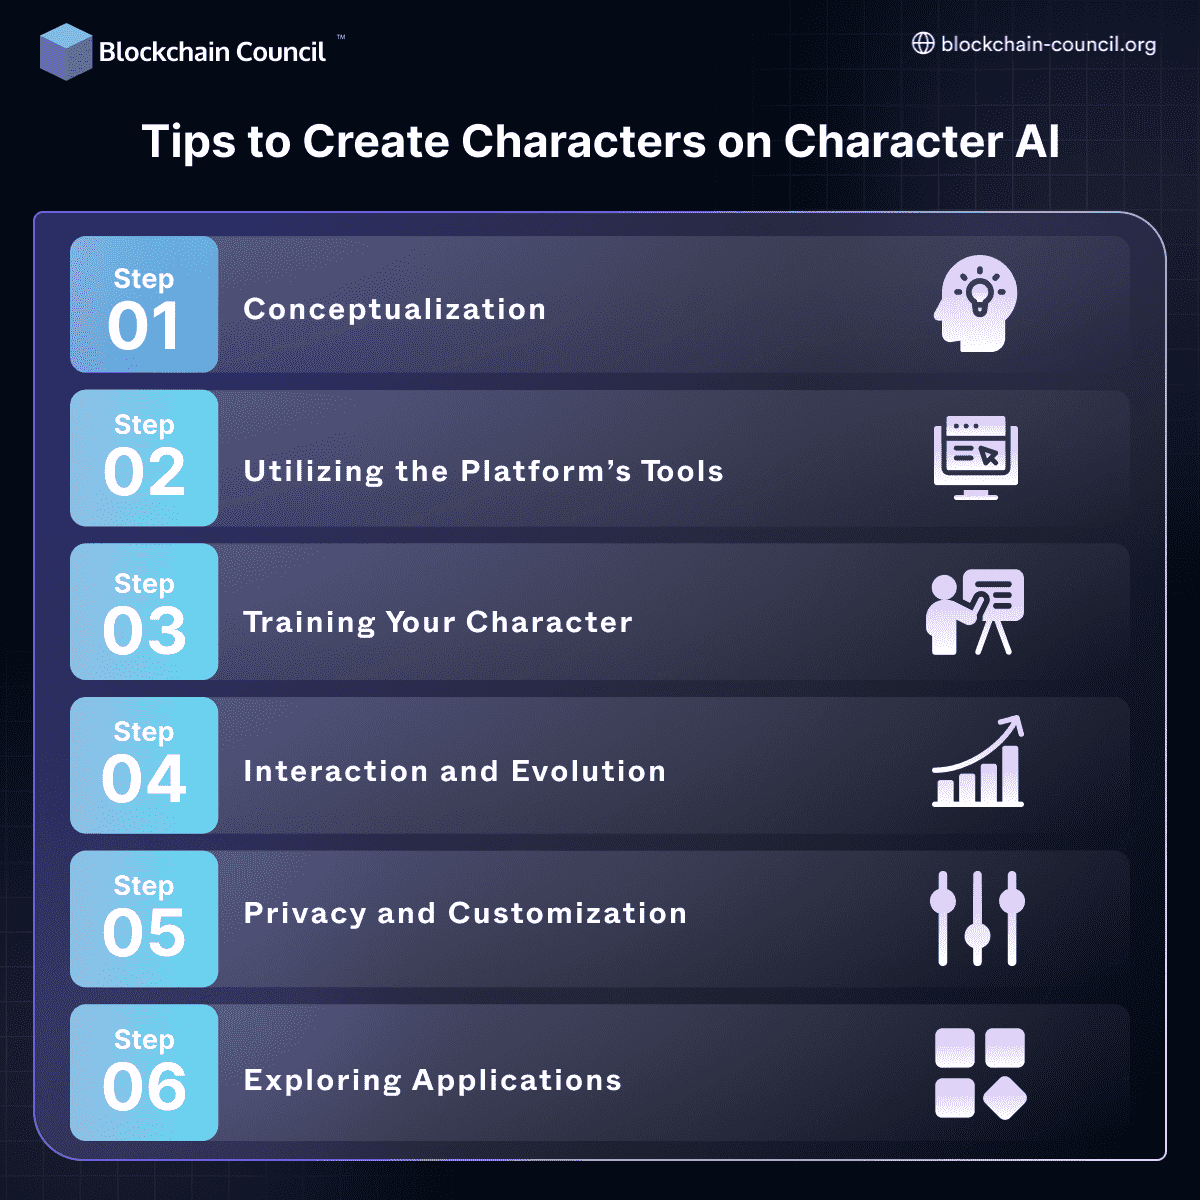 Tips to Create Characters on Character AI